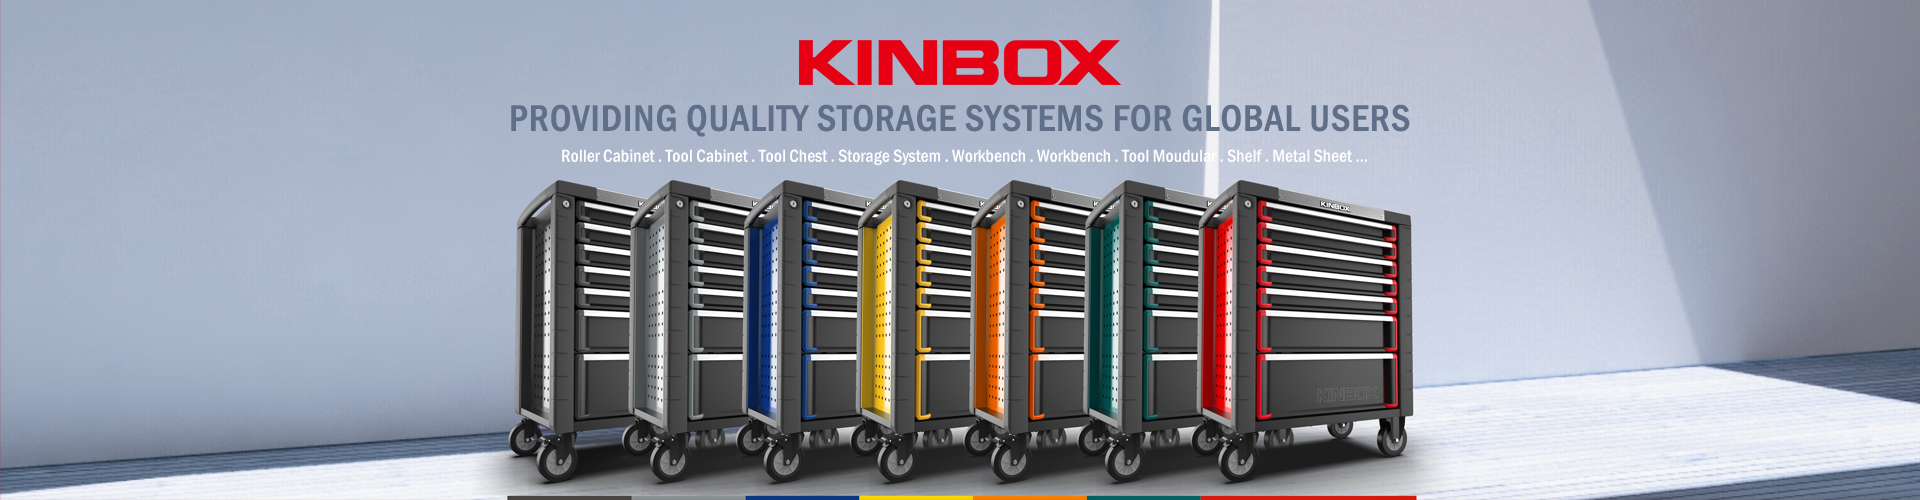 providing quality storage systems for global users